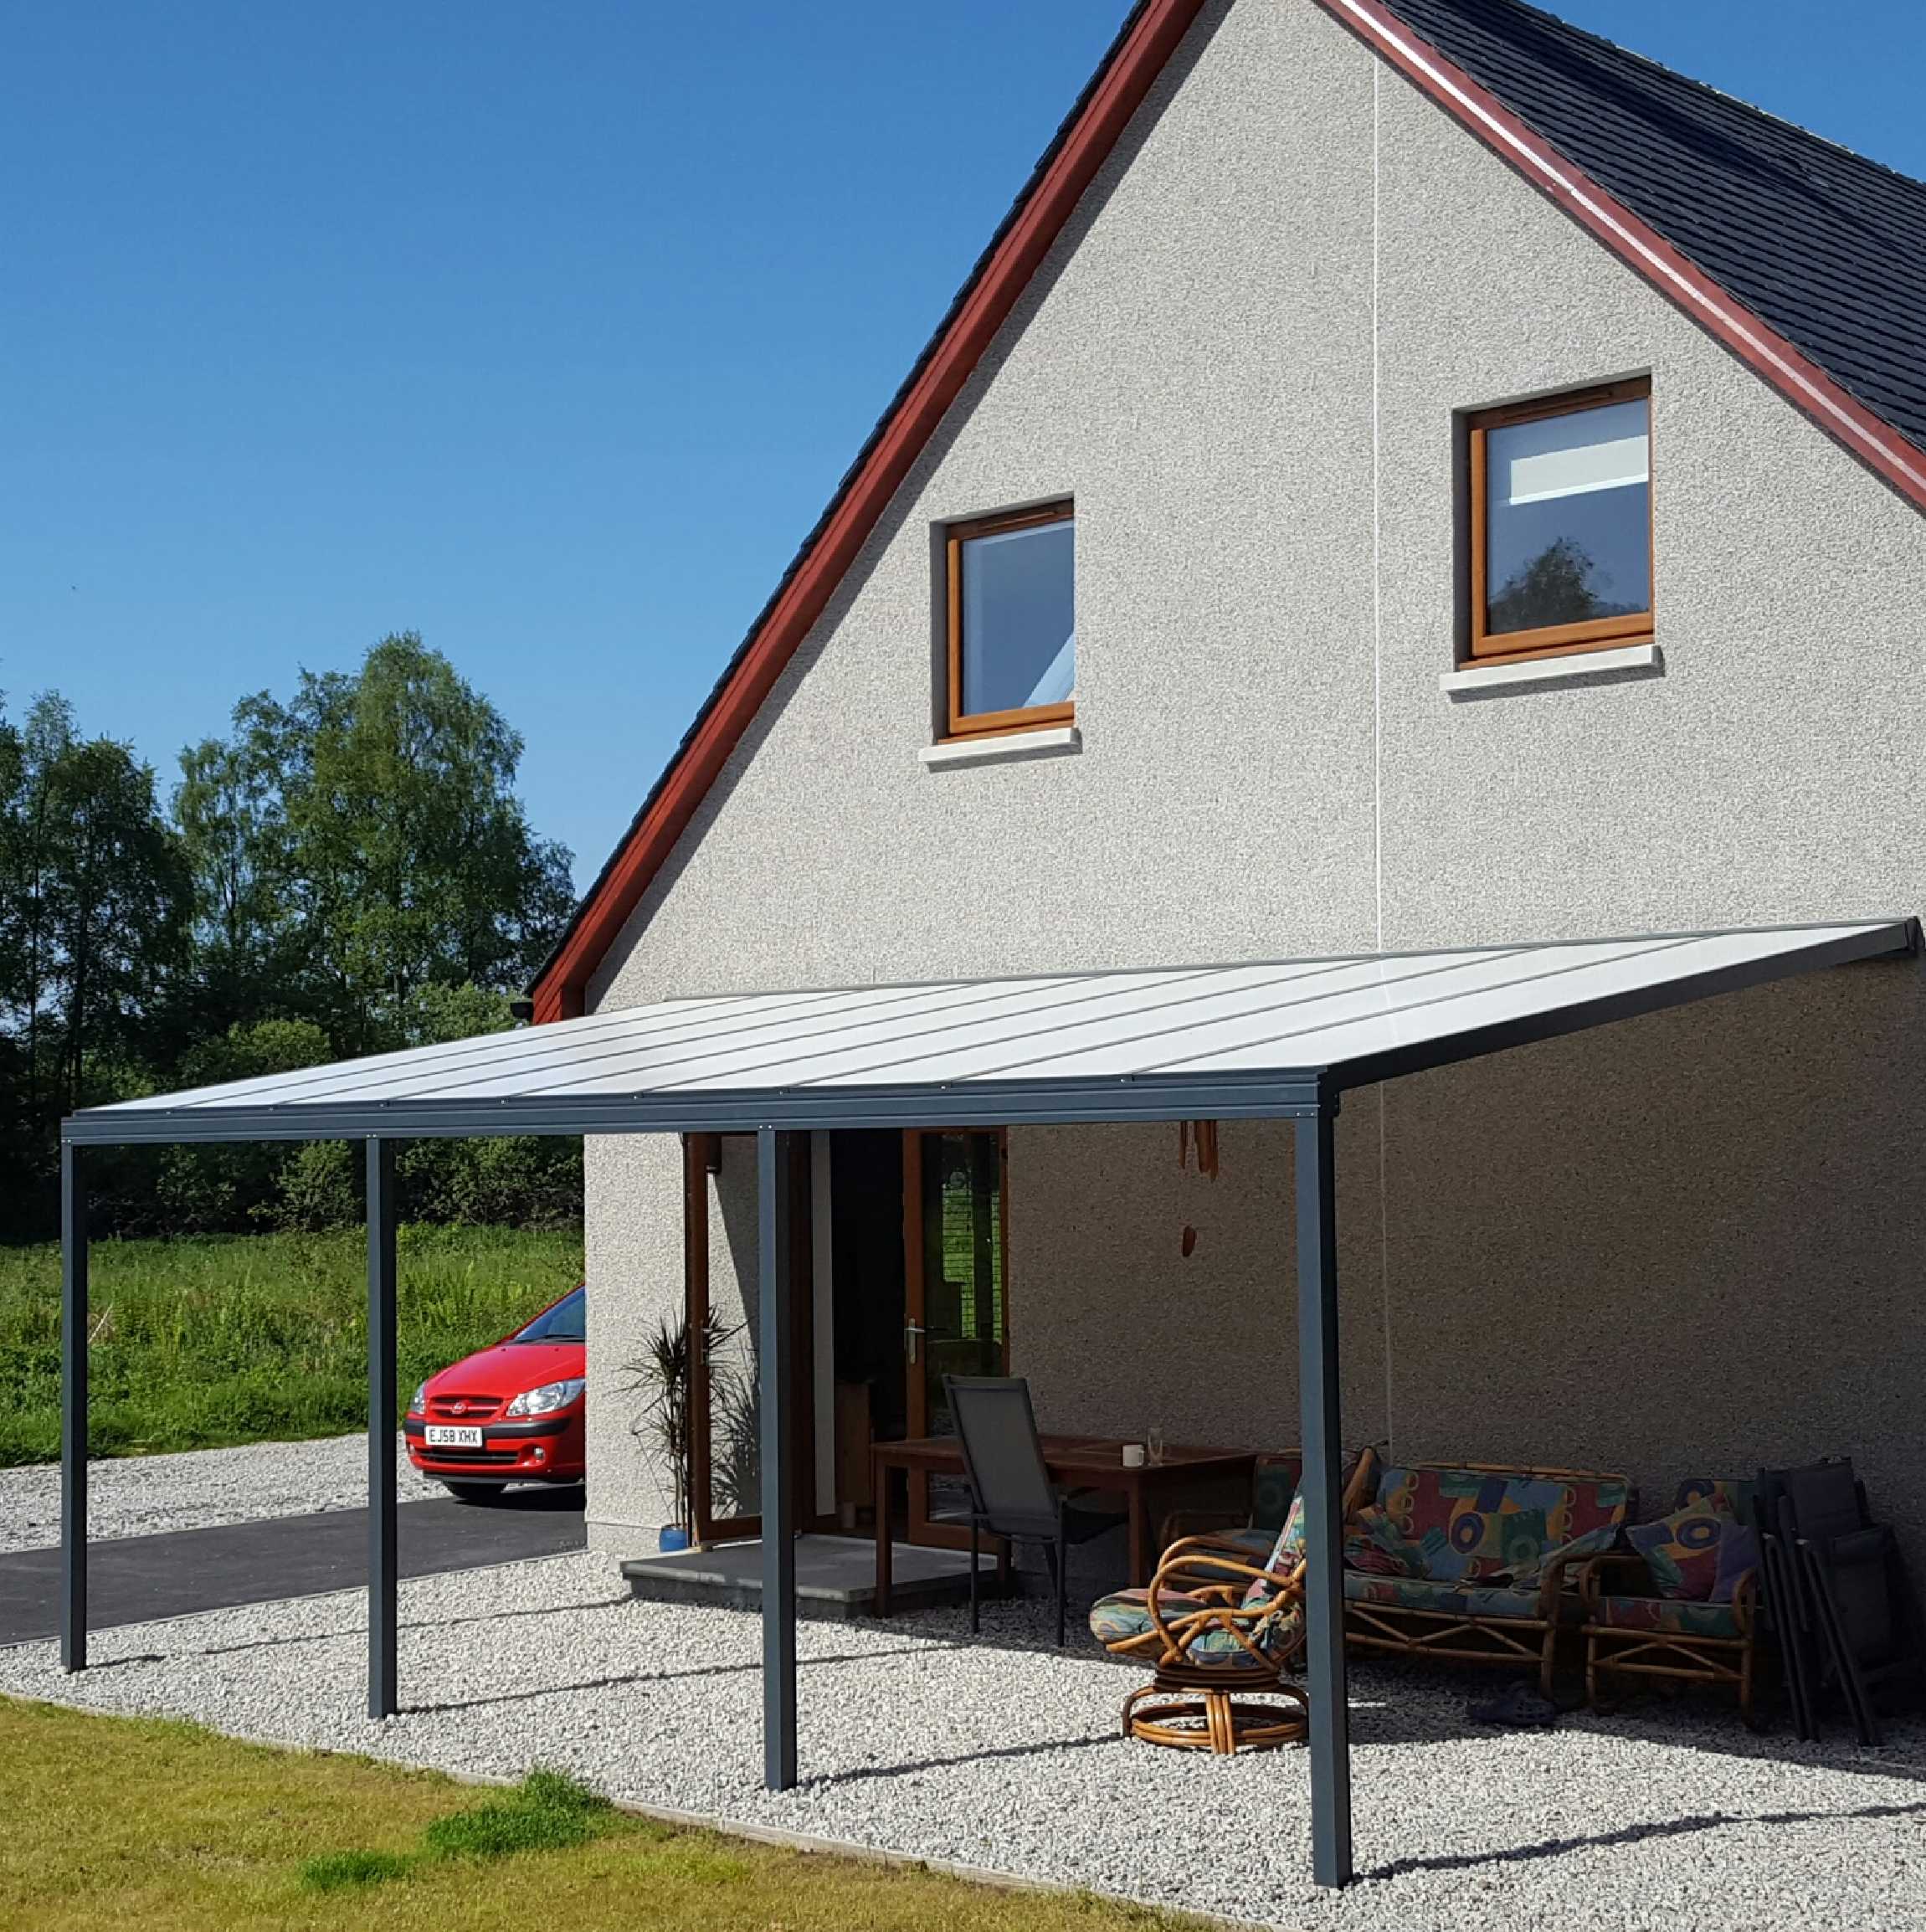 Great selection of SPECIAL OFFER Omega Smart Lean-To Canopy, Anthracite Grey, 16mm Polycarbonate Glazing - 2.5m (W) x 2.5m (P), (2) Supporting Posts